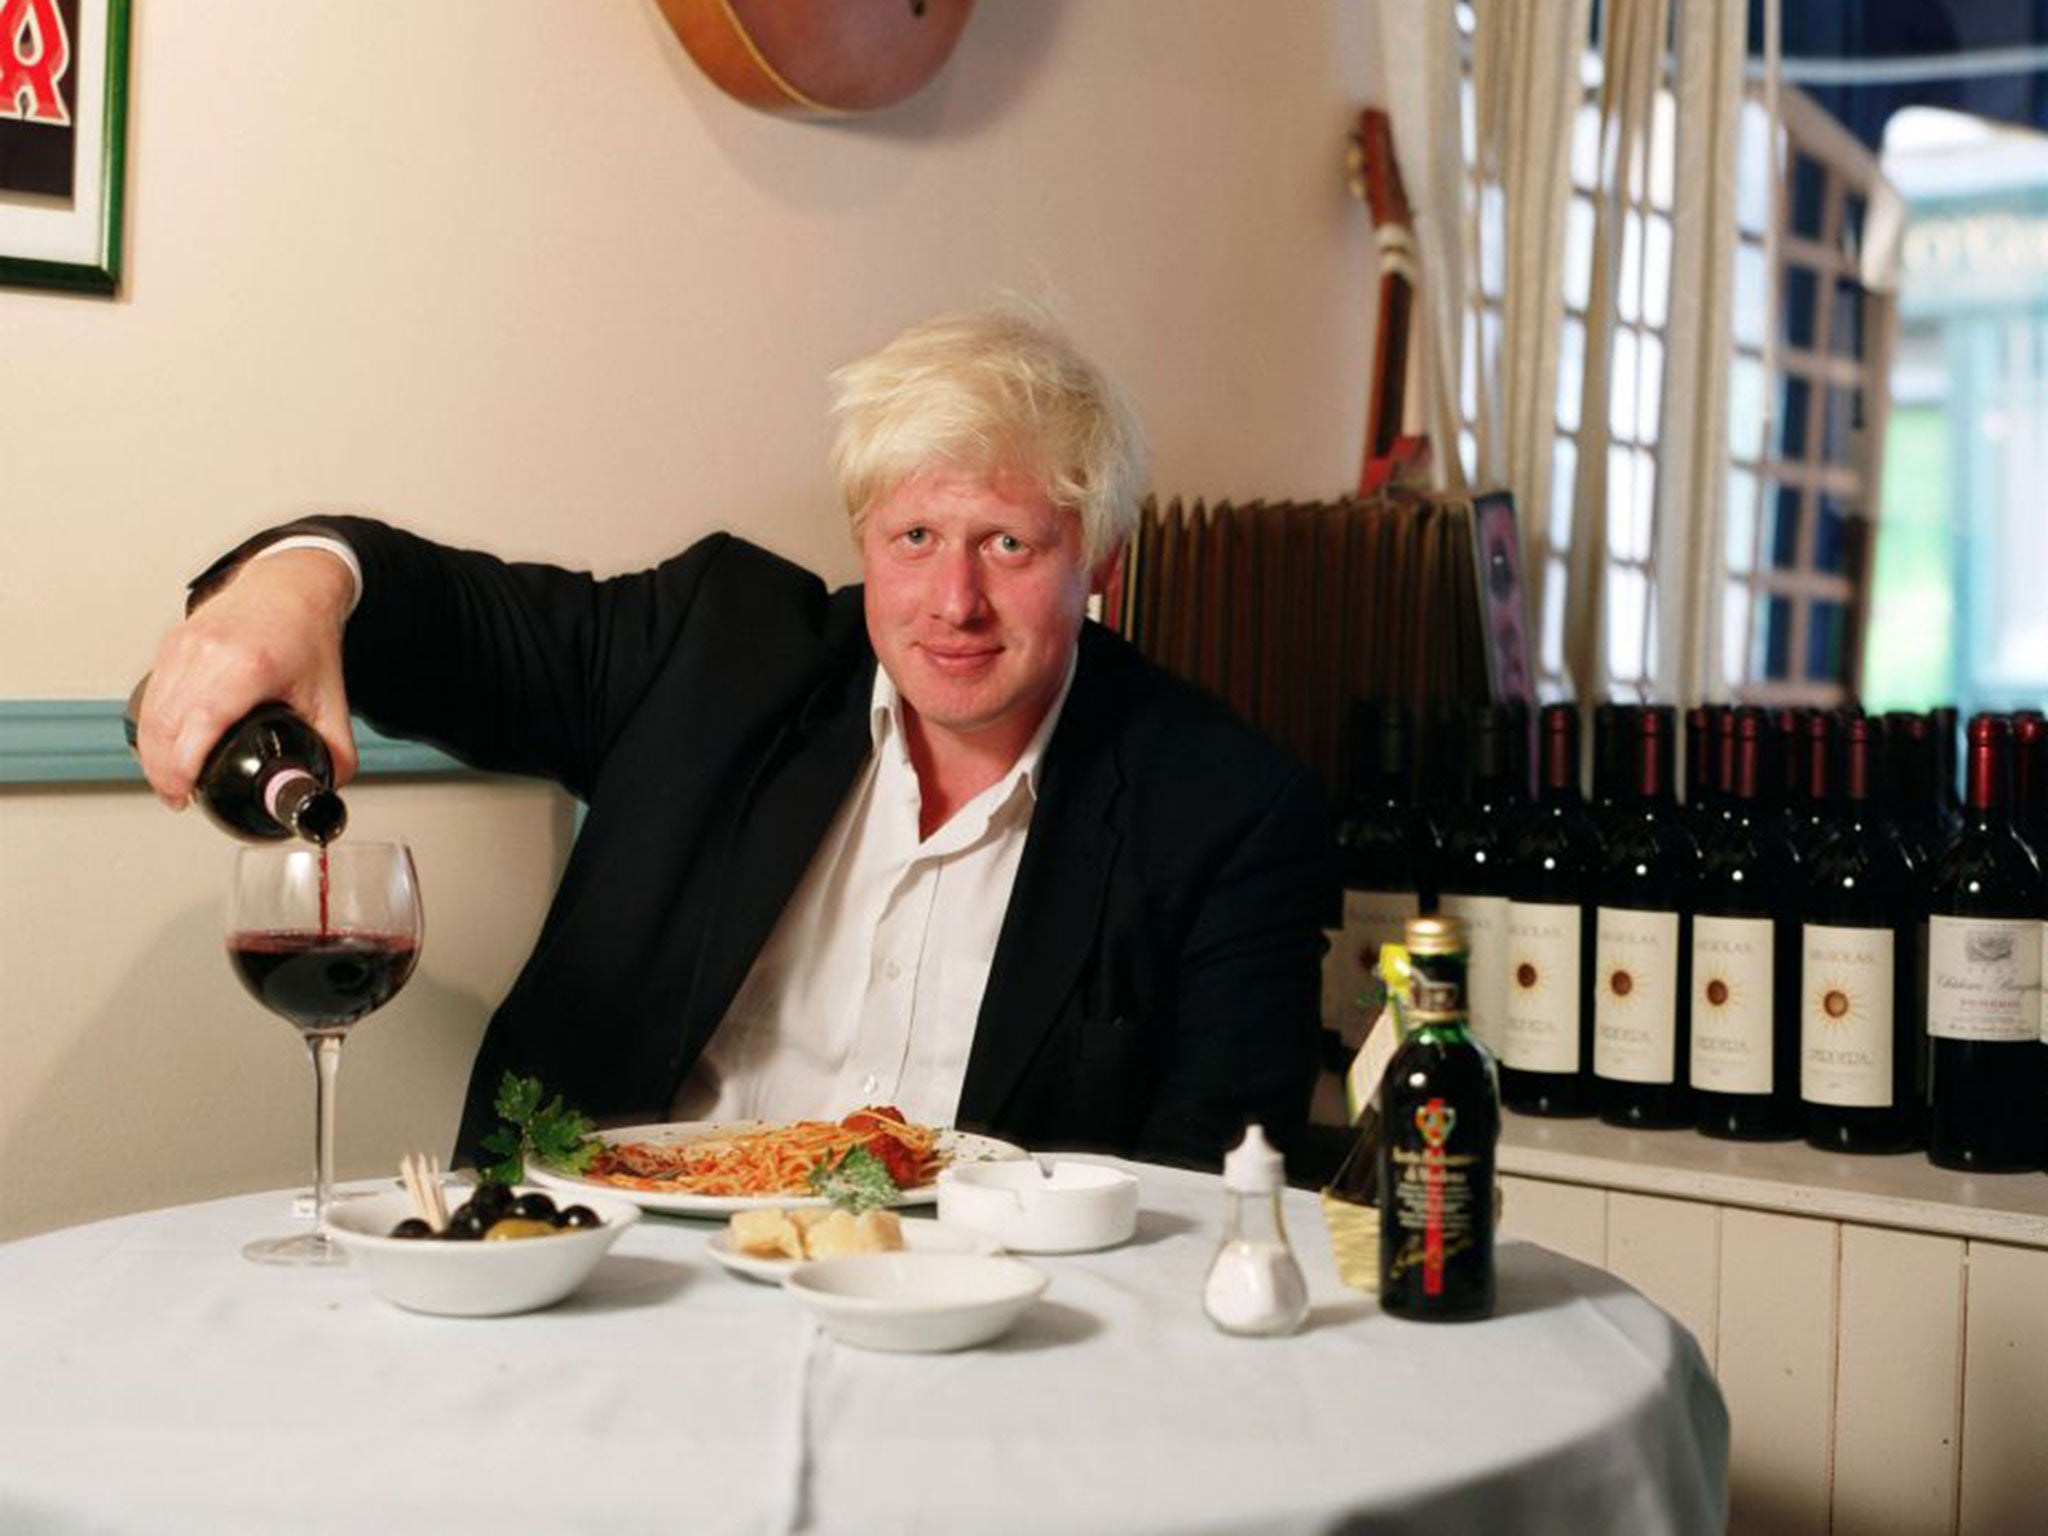 Boris Johnson didn’t get where he is today by being abstemious